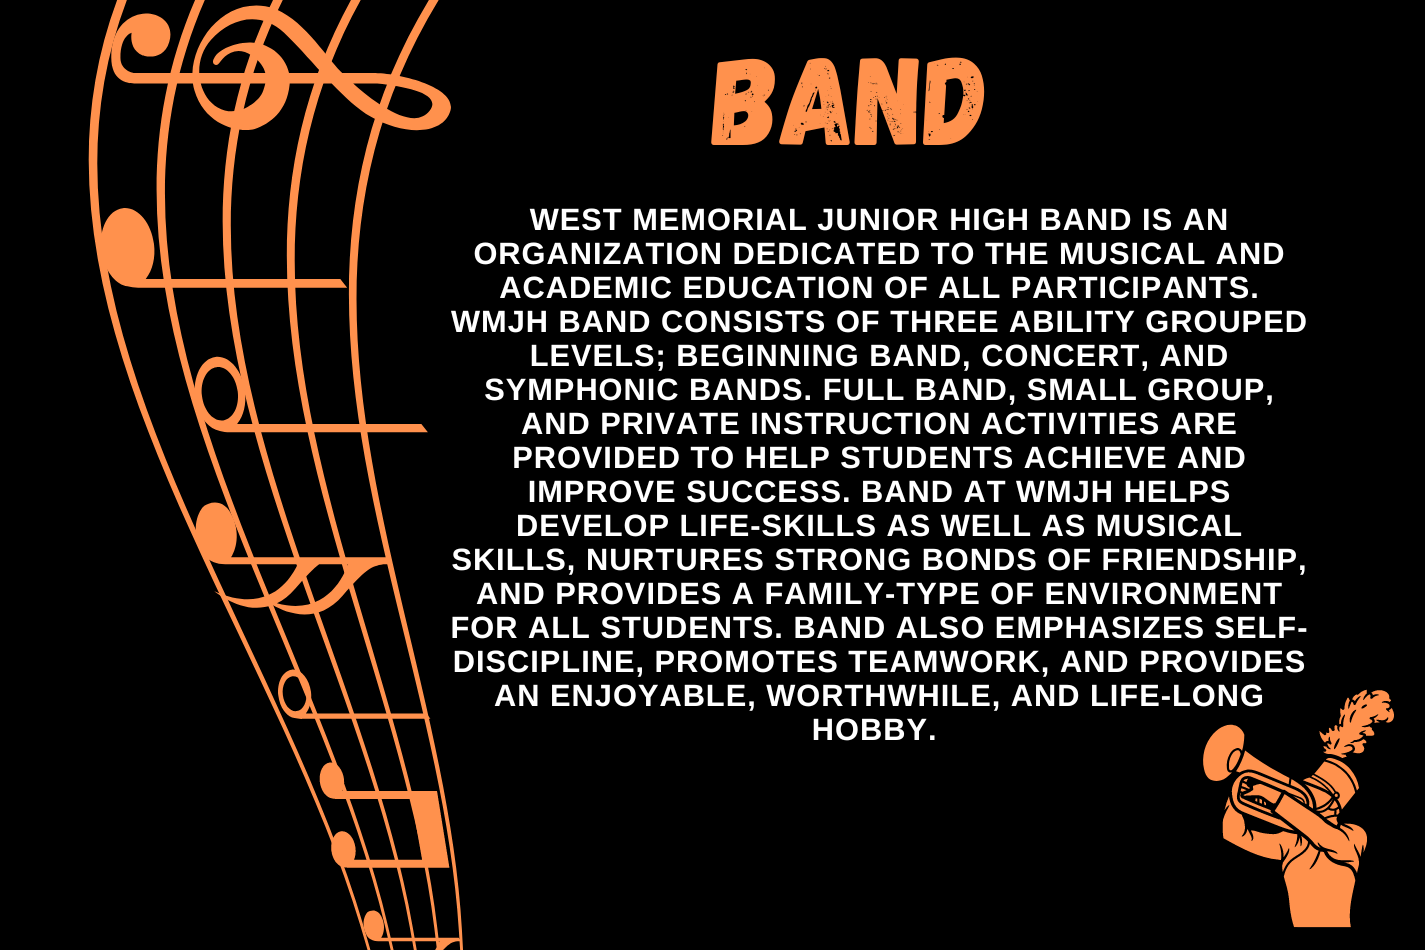 Band class is ability grouped and helps develop skills